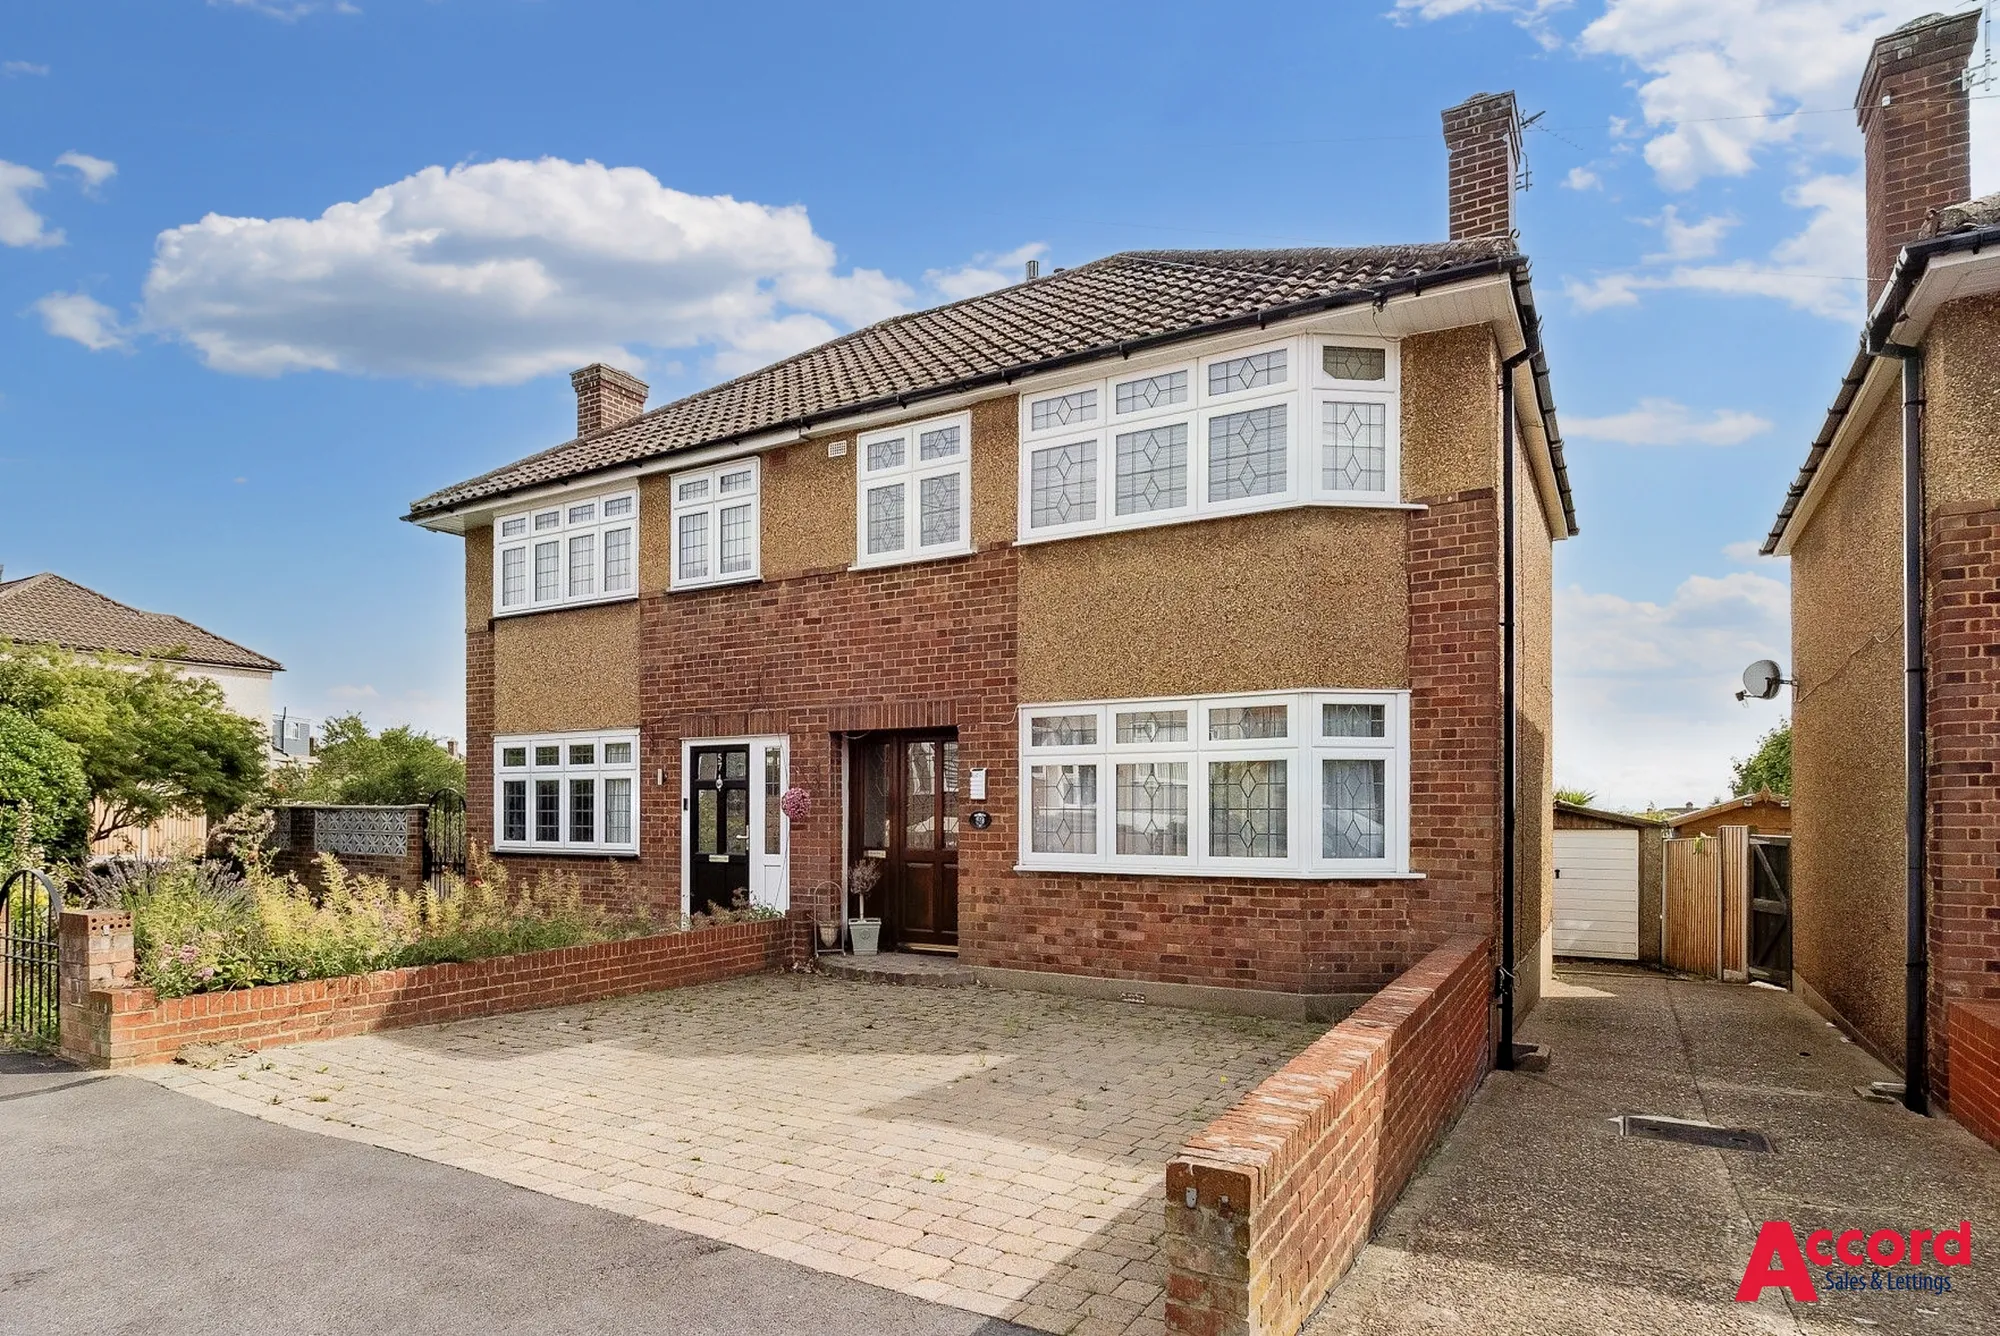 3 bed semi-detached house for sale in Glenton Way, Romford - Property Image 1